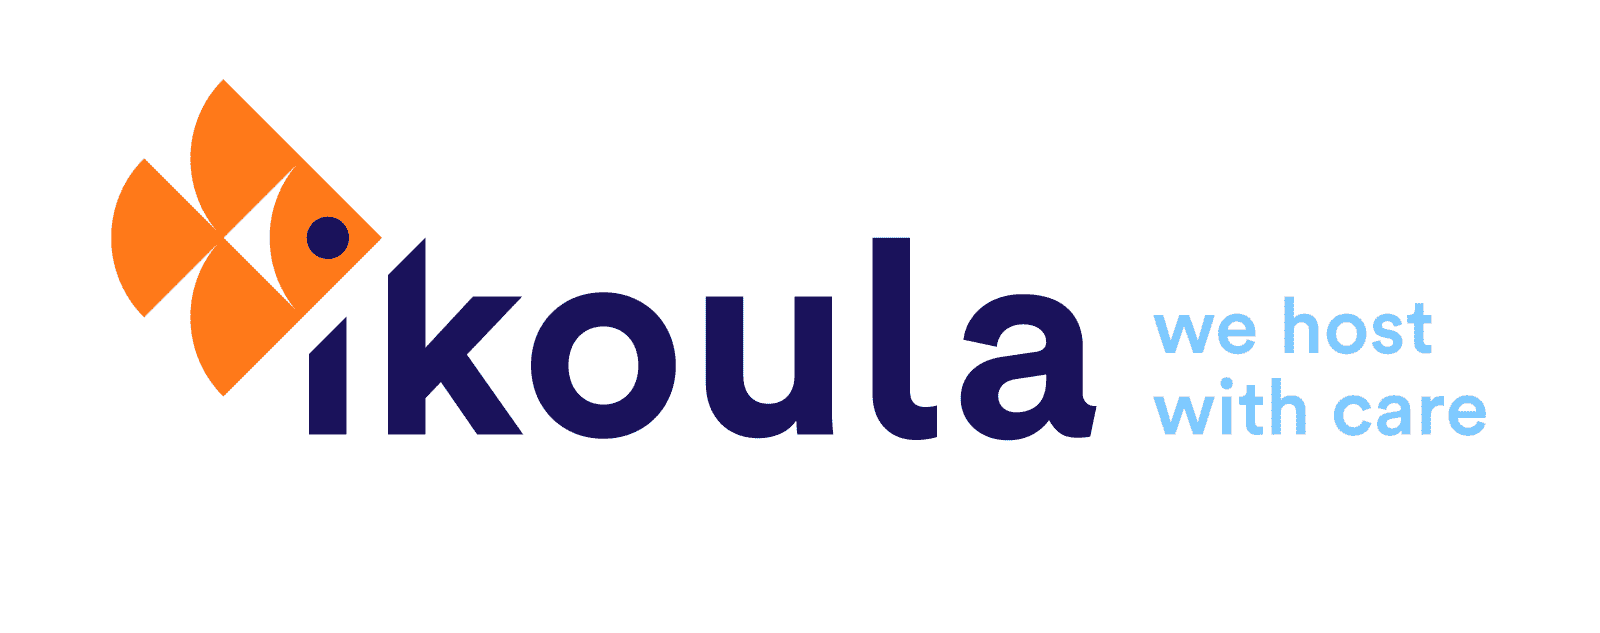 Ikoula, we host with care